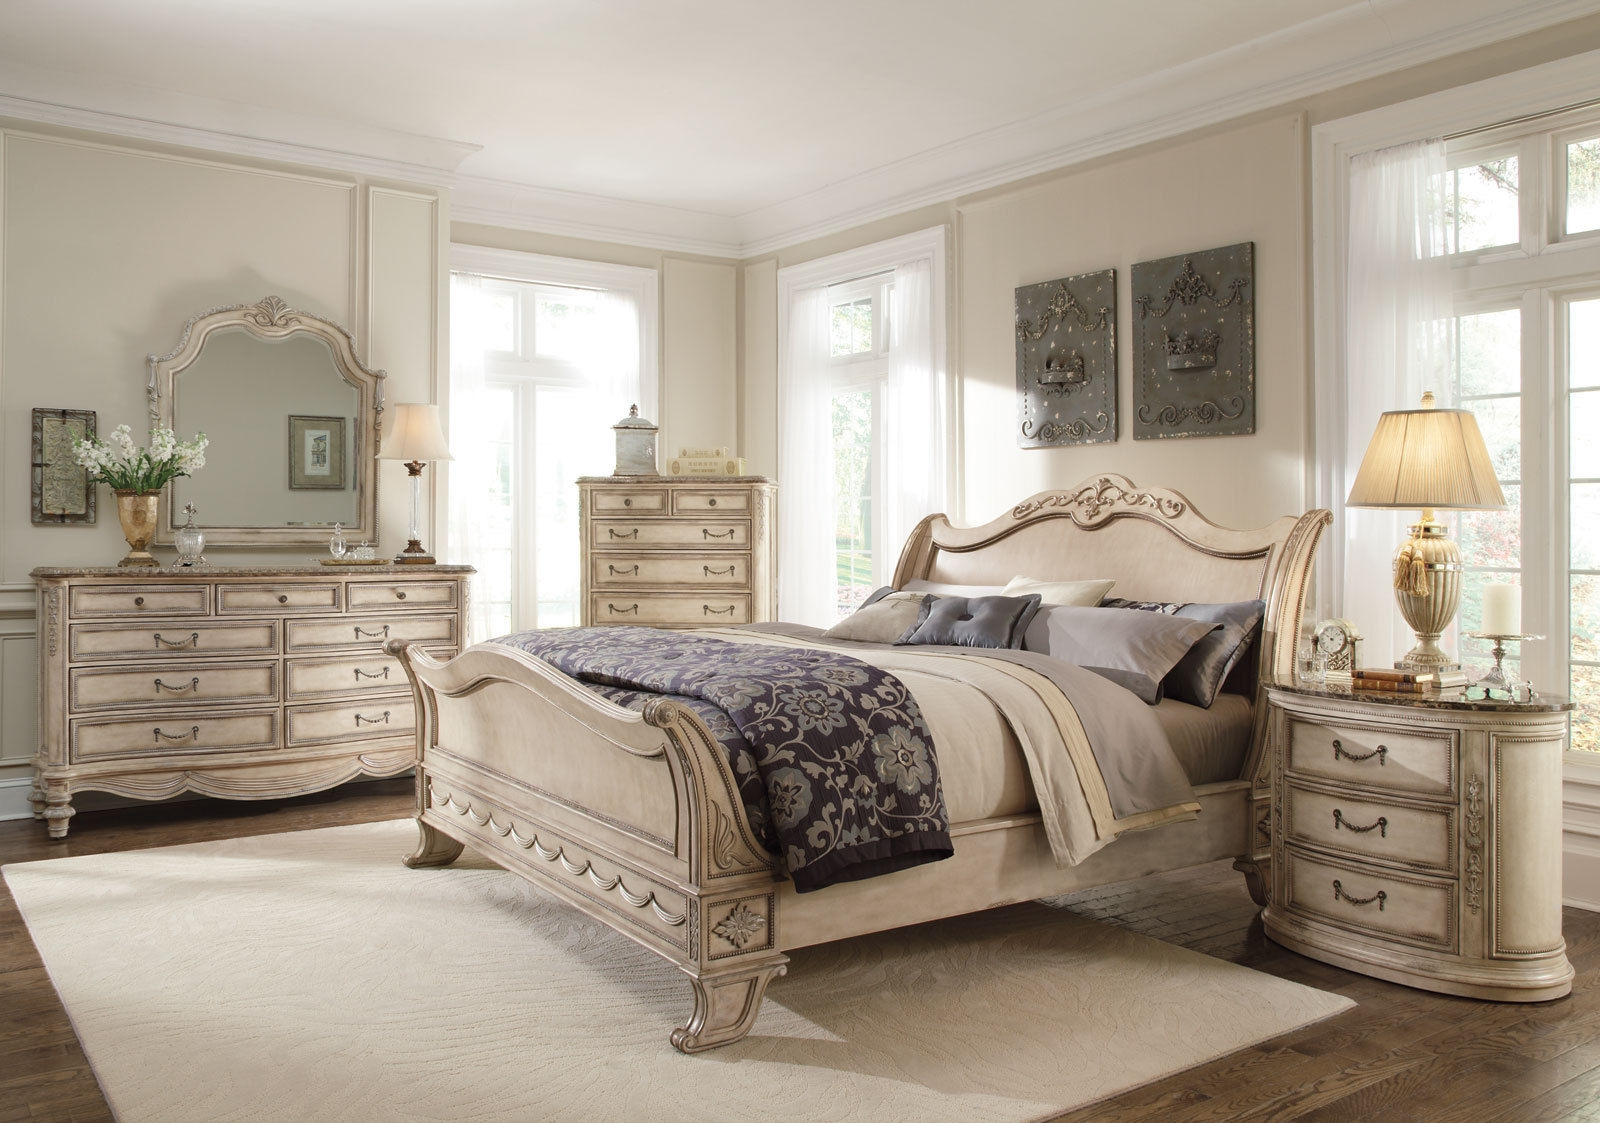 Off White Bedroom Furniture Sets Cileather Home Design Ideas in sizing 1600 X 1123